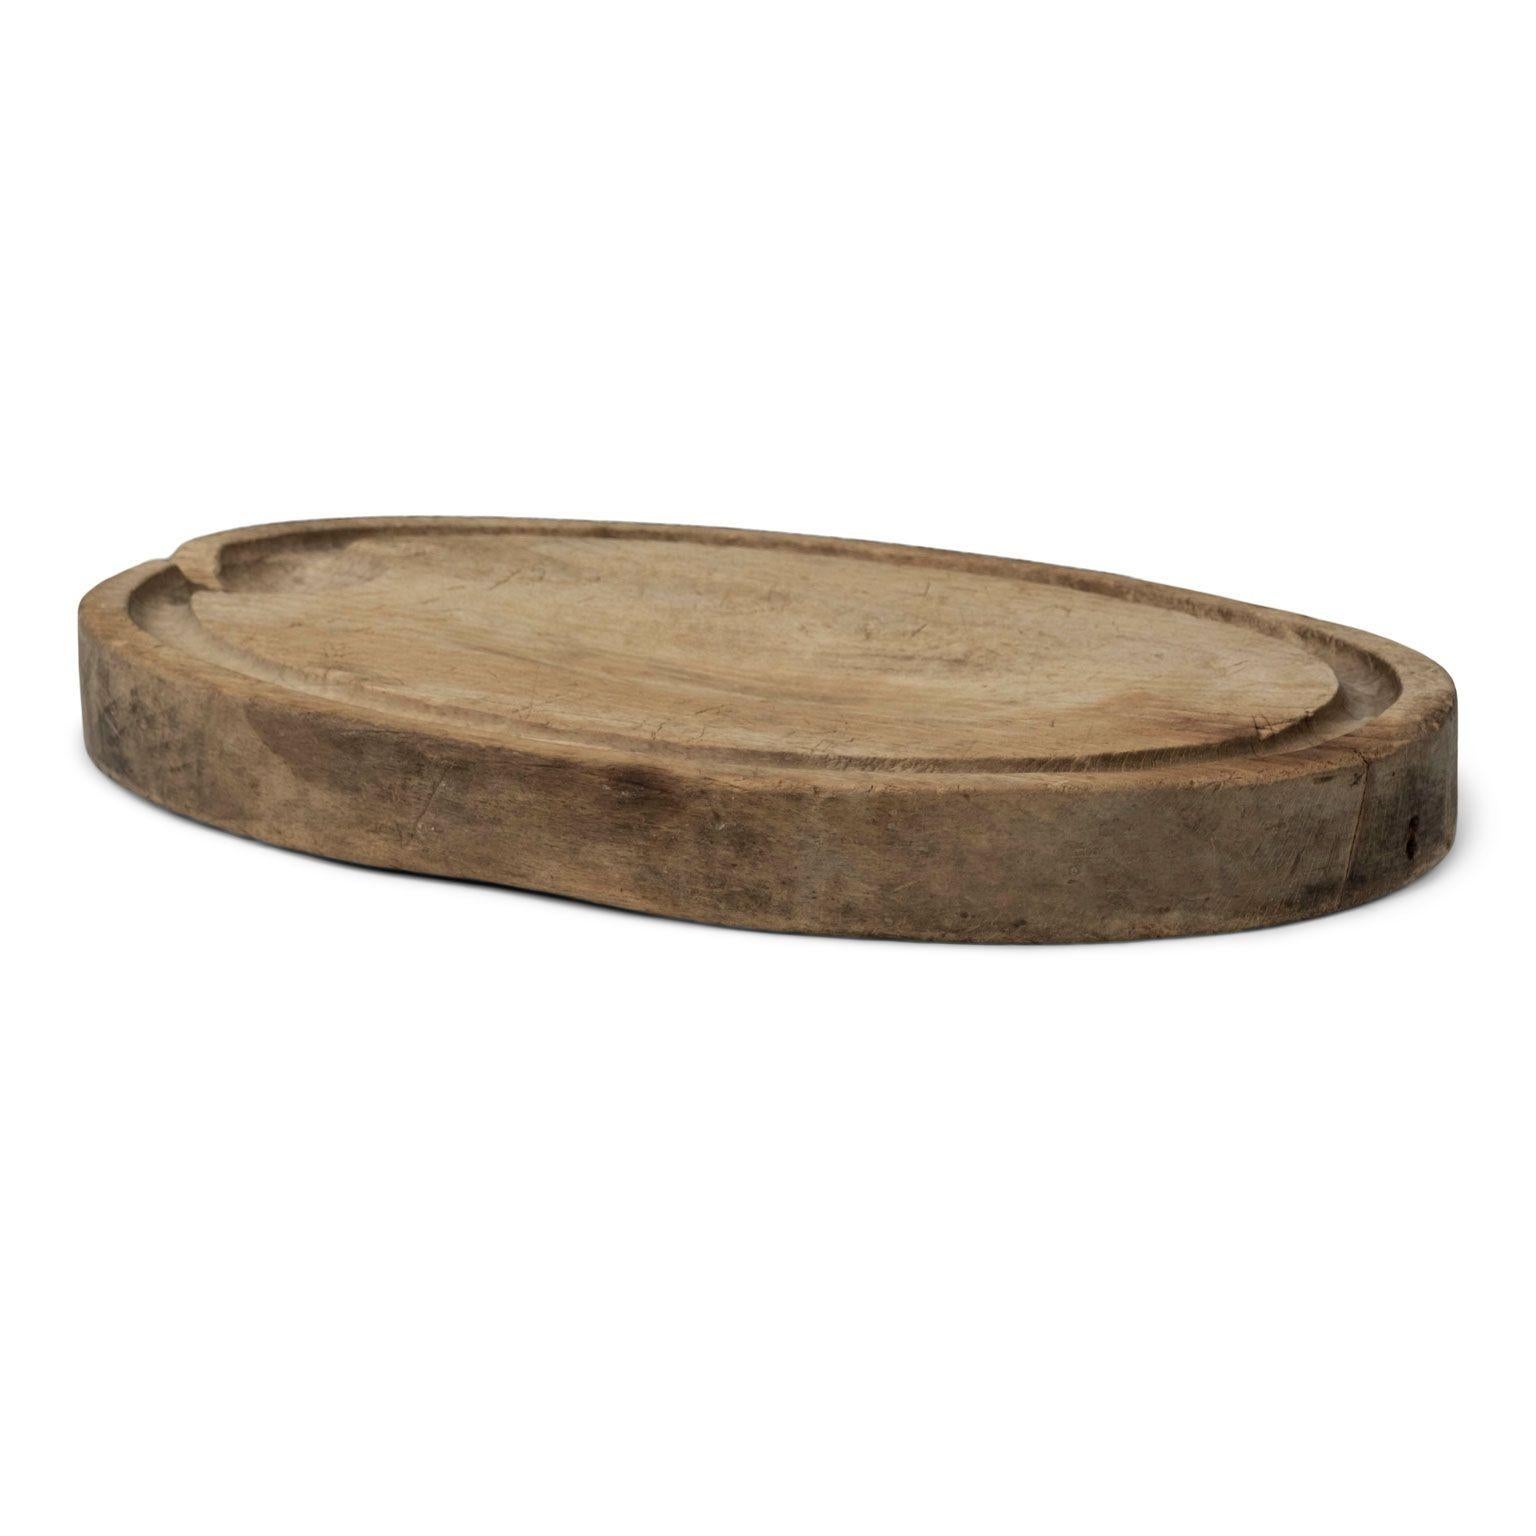 Thick Oval-Shaped Cutting Board 3